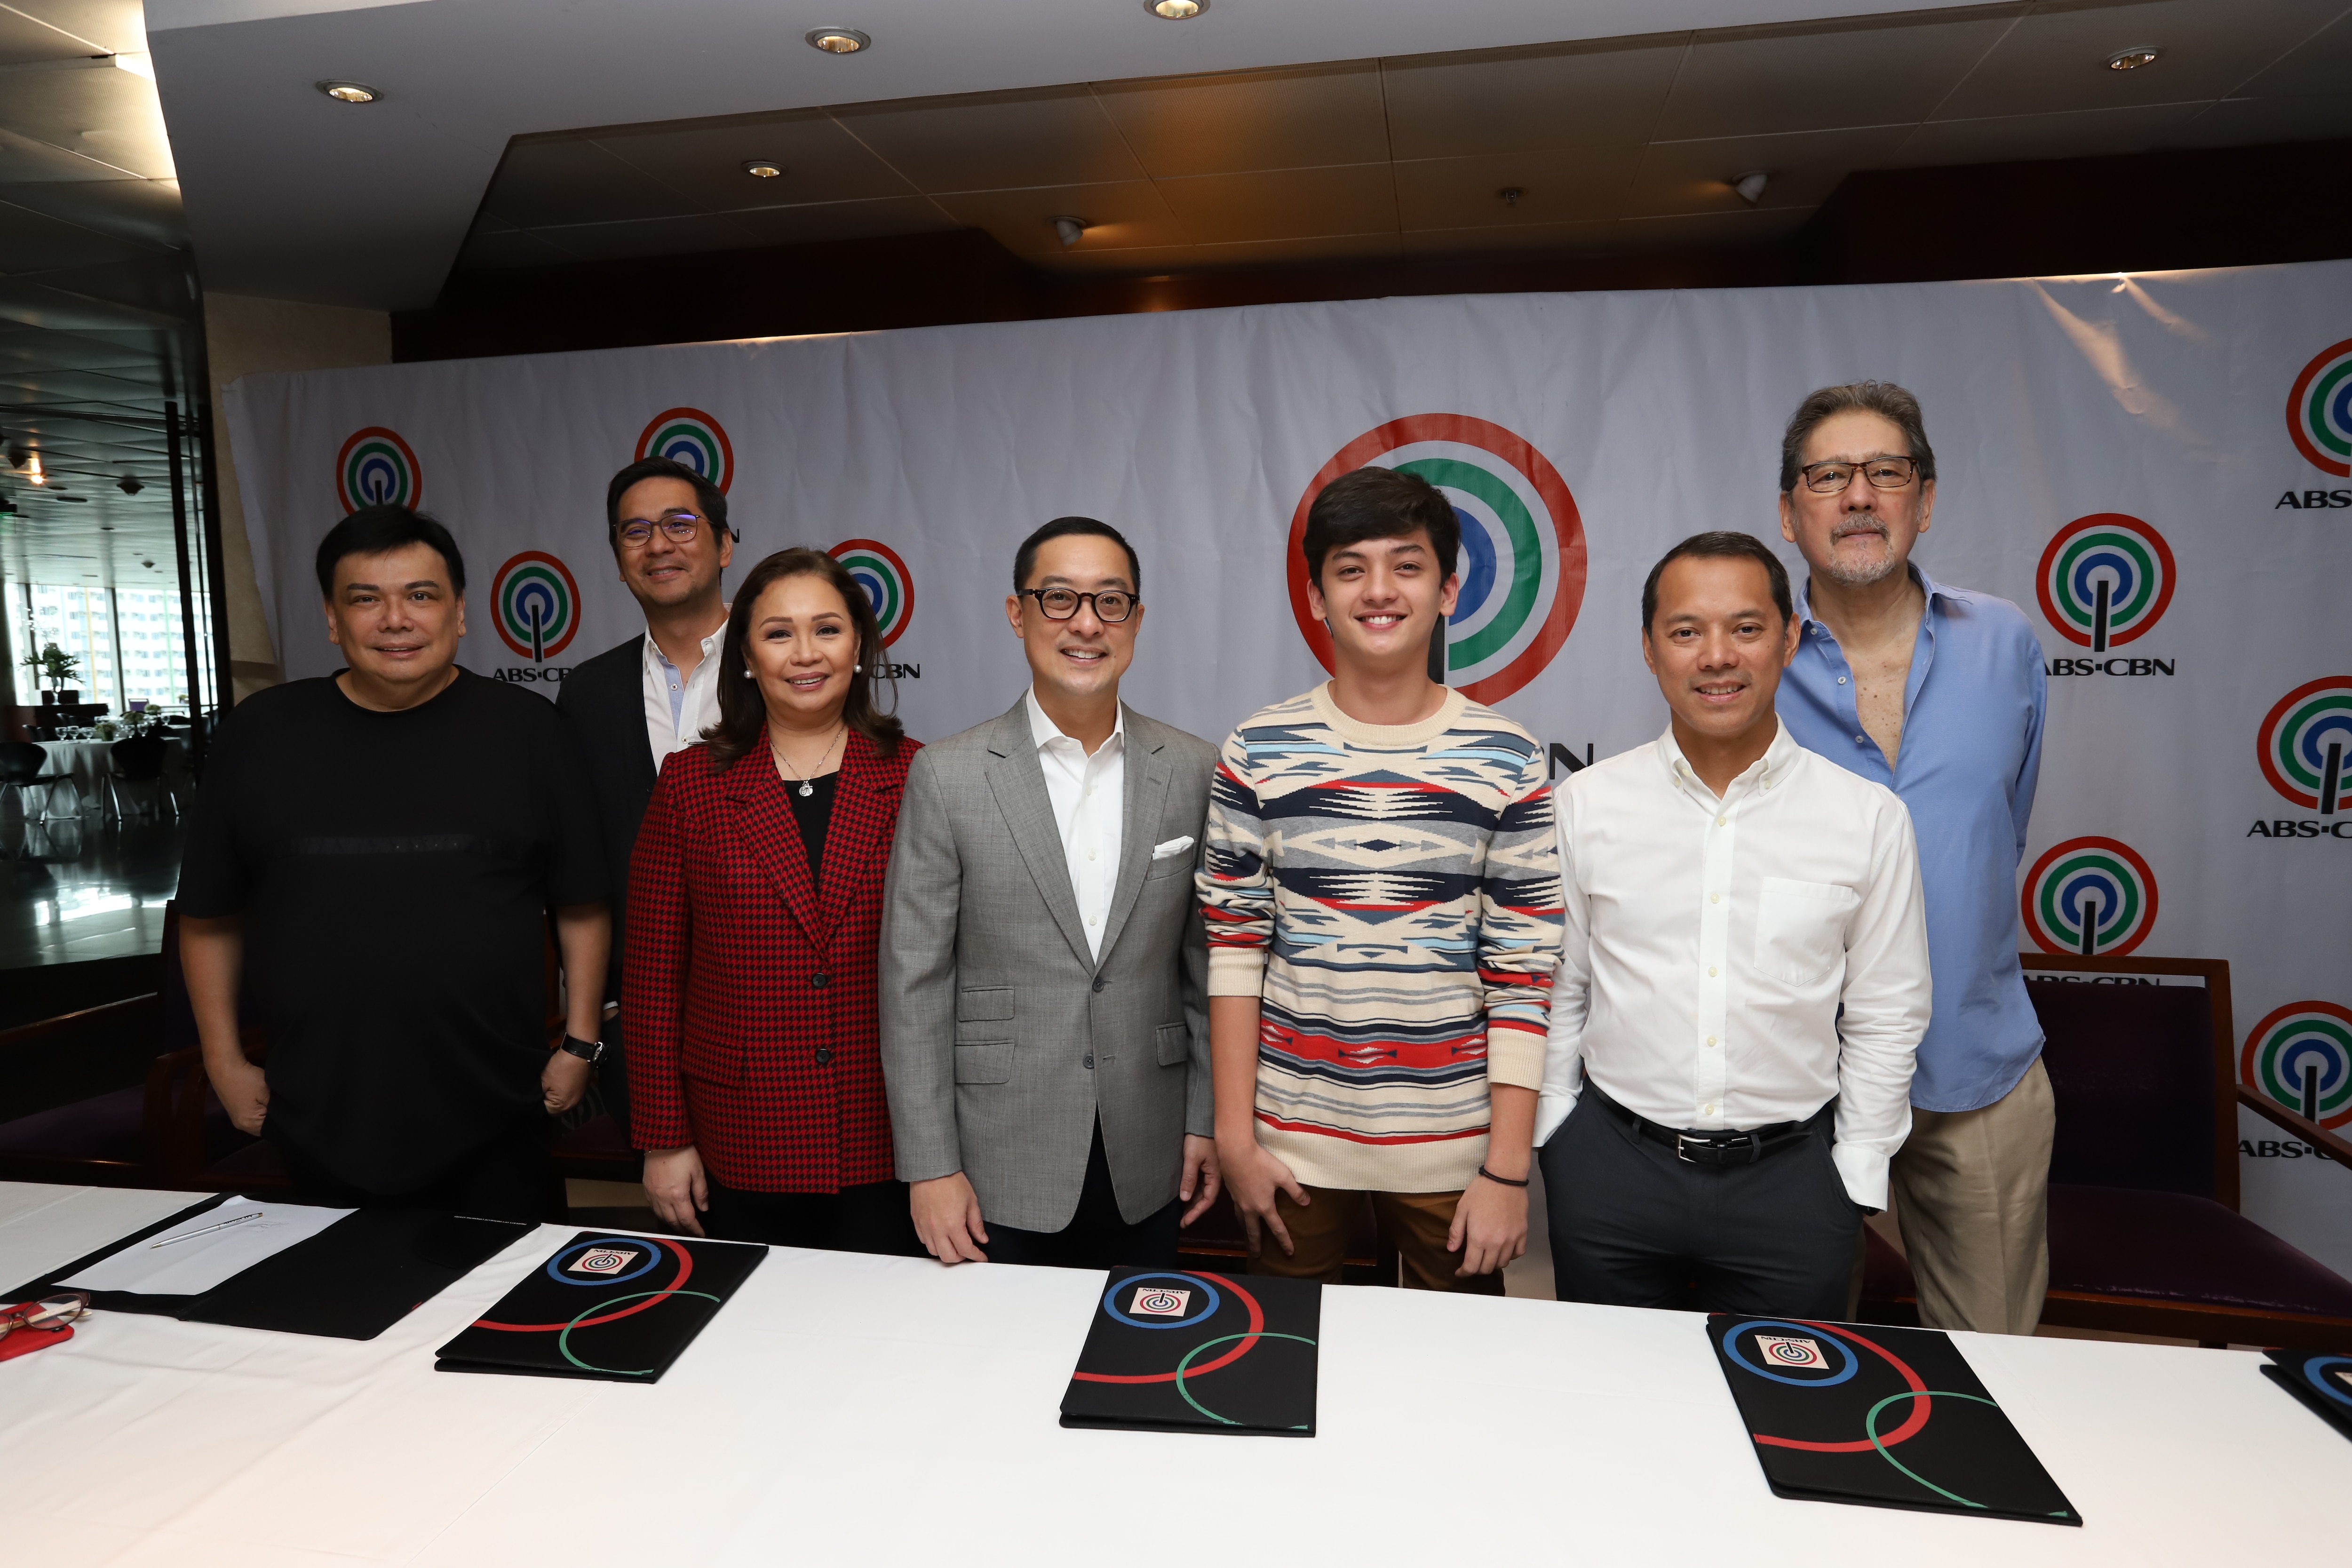 Seth Fedelin with ABS CBN executives